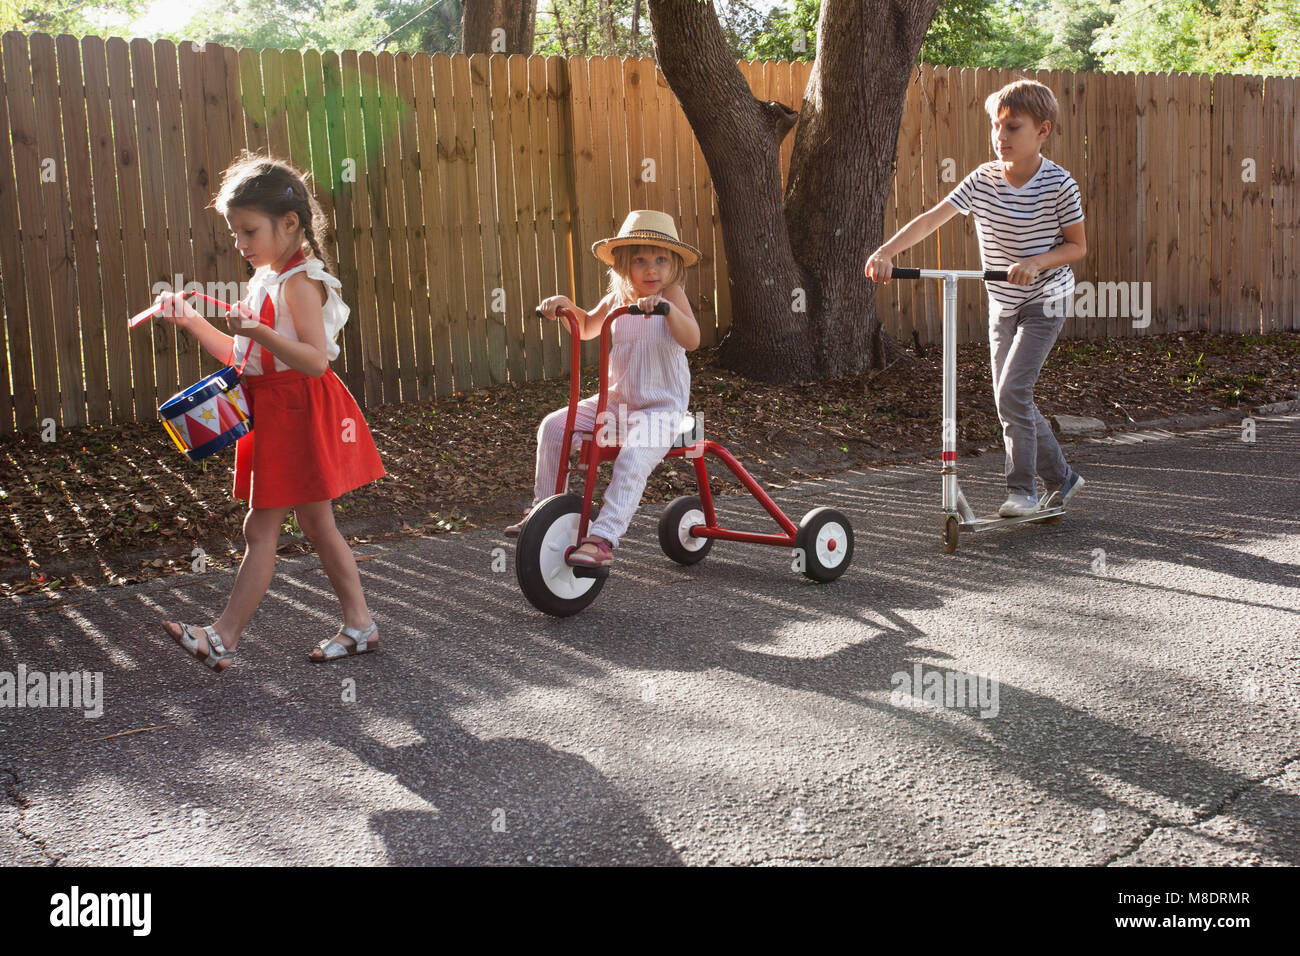 Three children in mini parade, banging drum, riding tricycle and using scooter Stock Photo